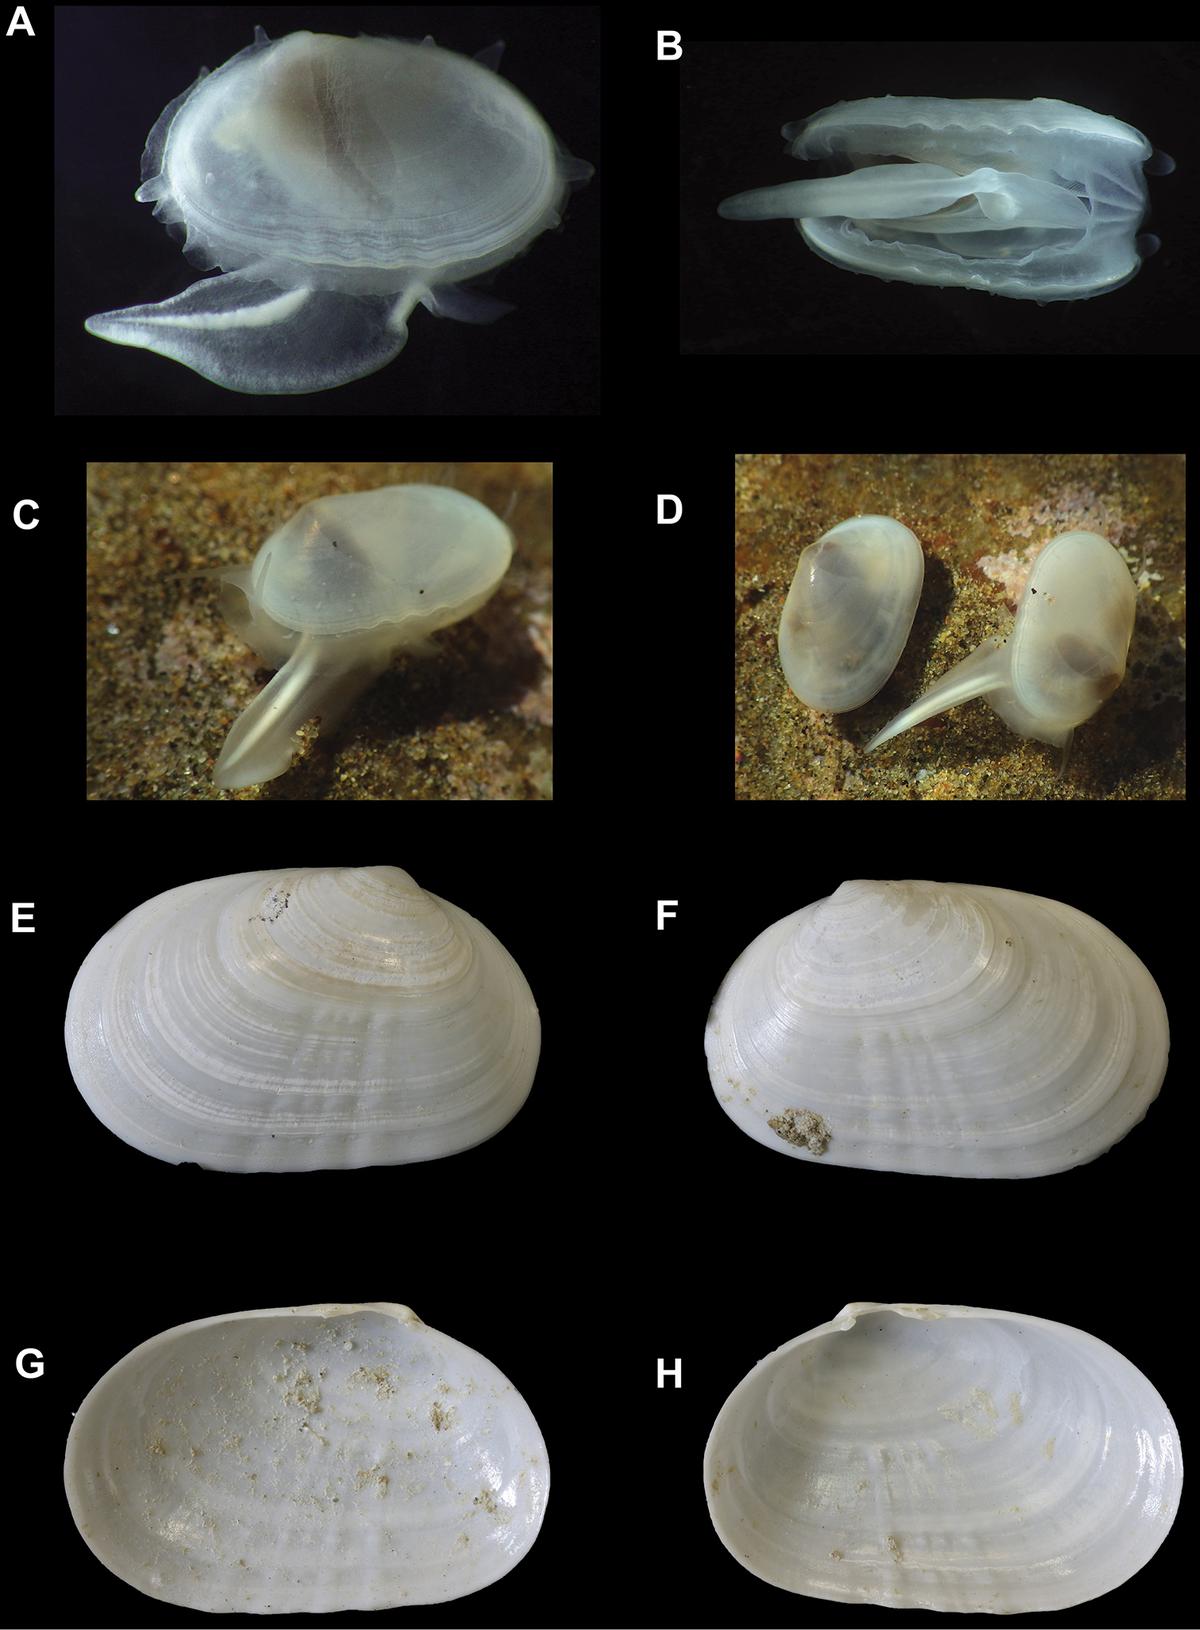 The clam is called Cymatioa cooki and is translucent with cryptic habits, according to the researchers.